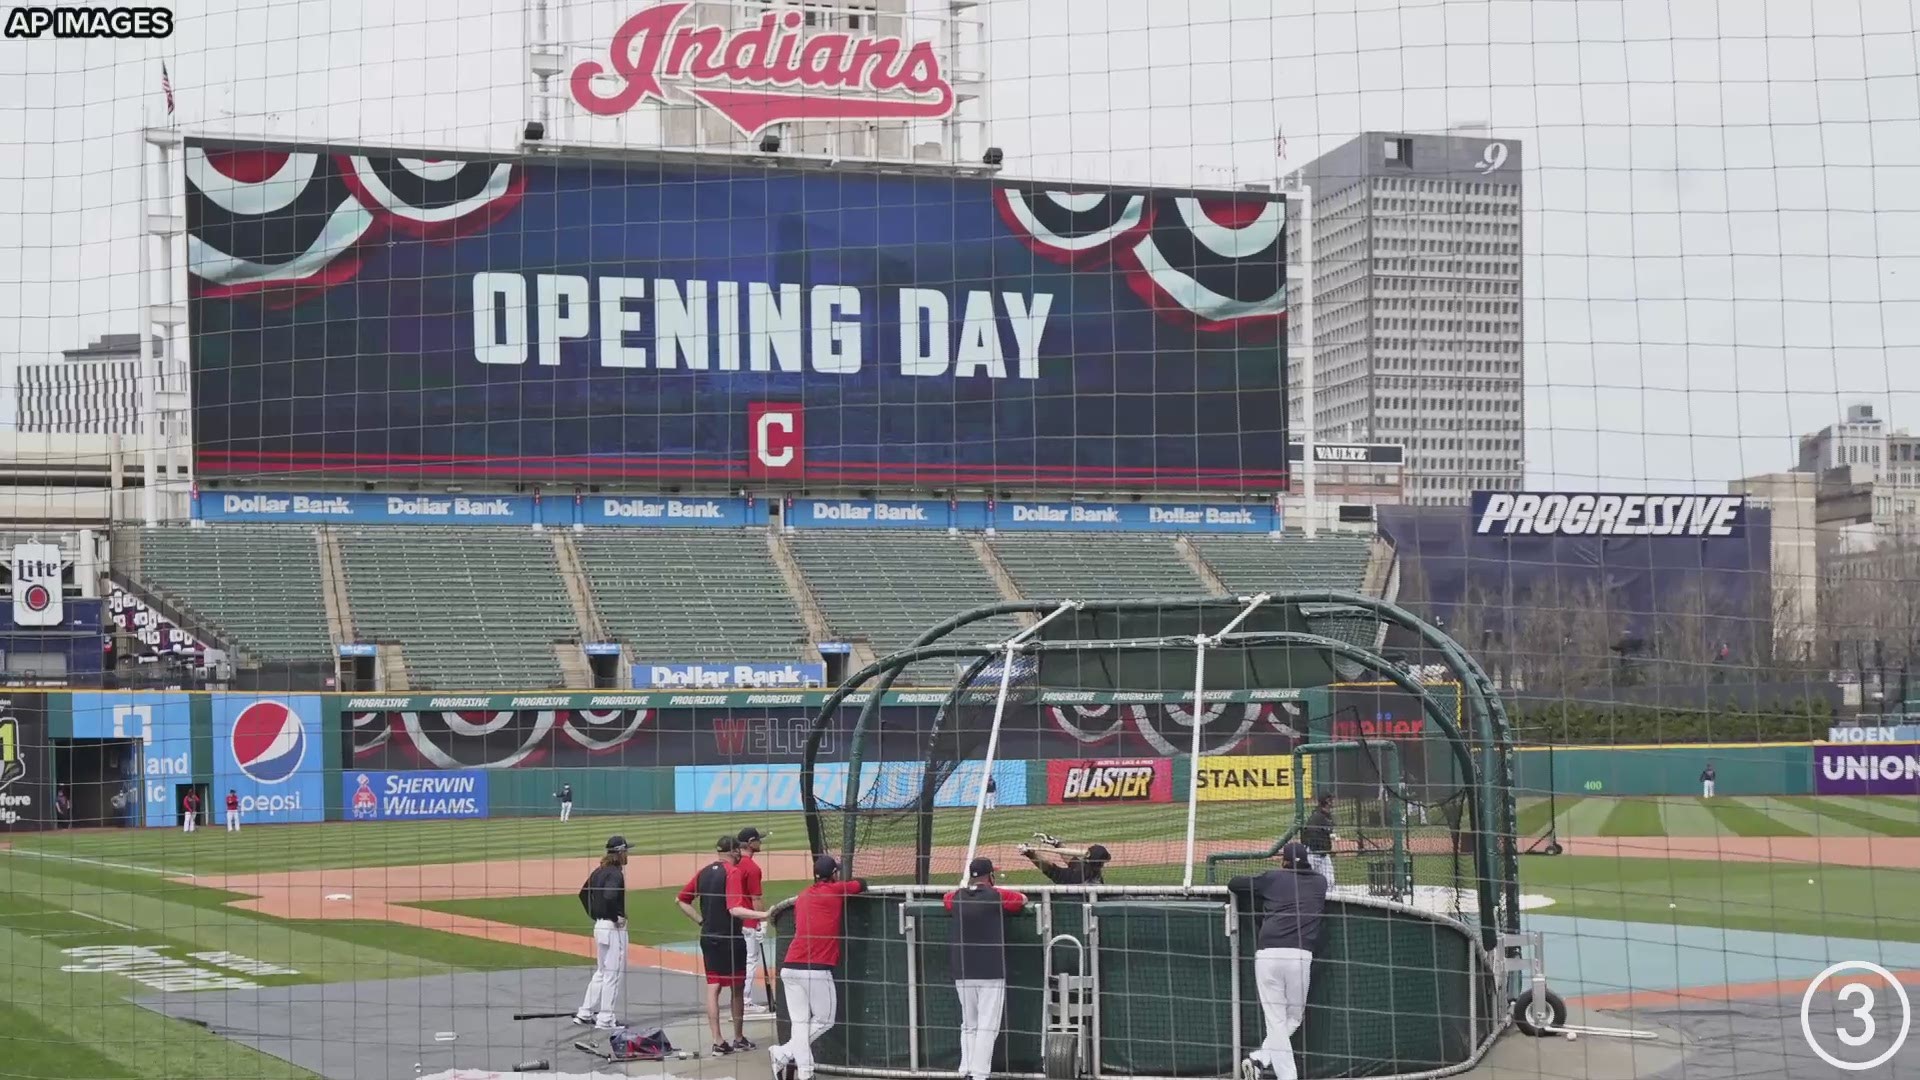 Baseball is back at Progressive Field.  The Cleveland Indians host the Kansas City Royals in the home opener.